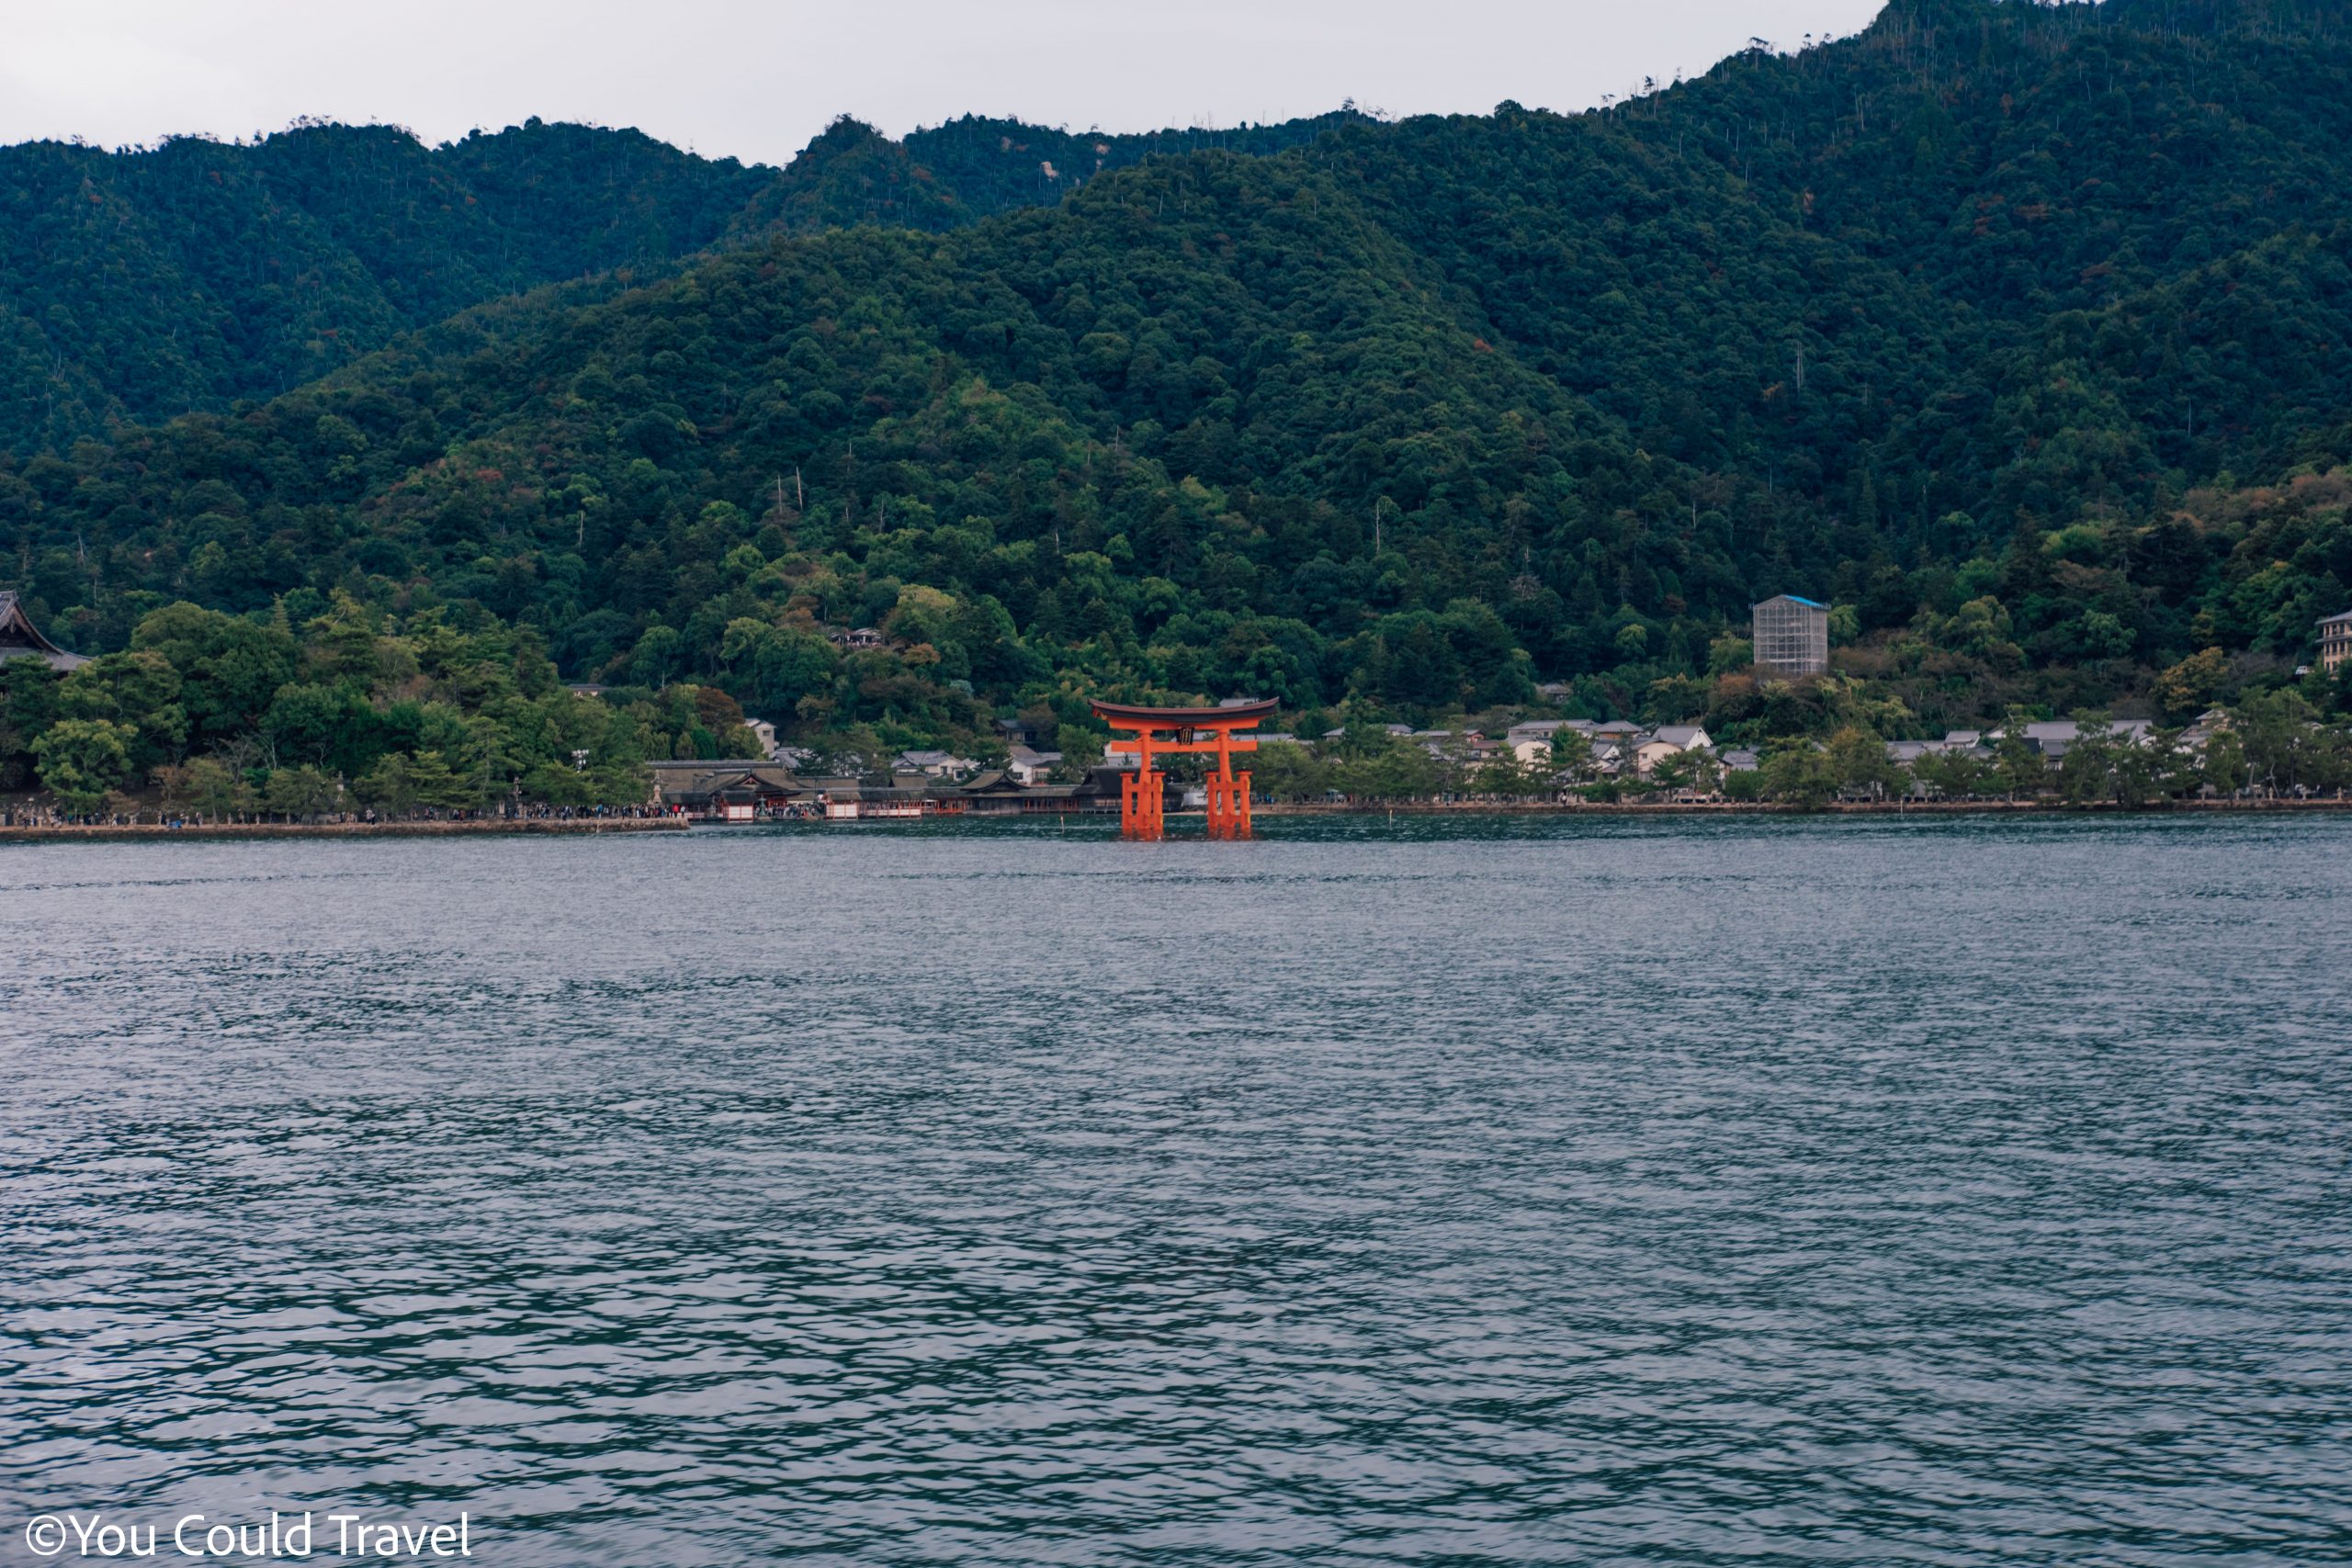 Itsukushima shrine with the Great Torii as seen from the JR Ferry